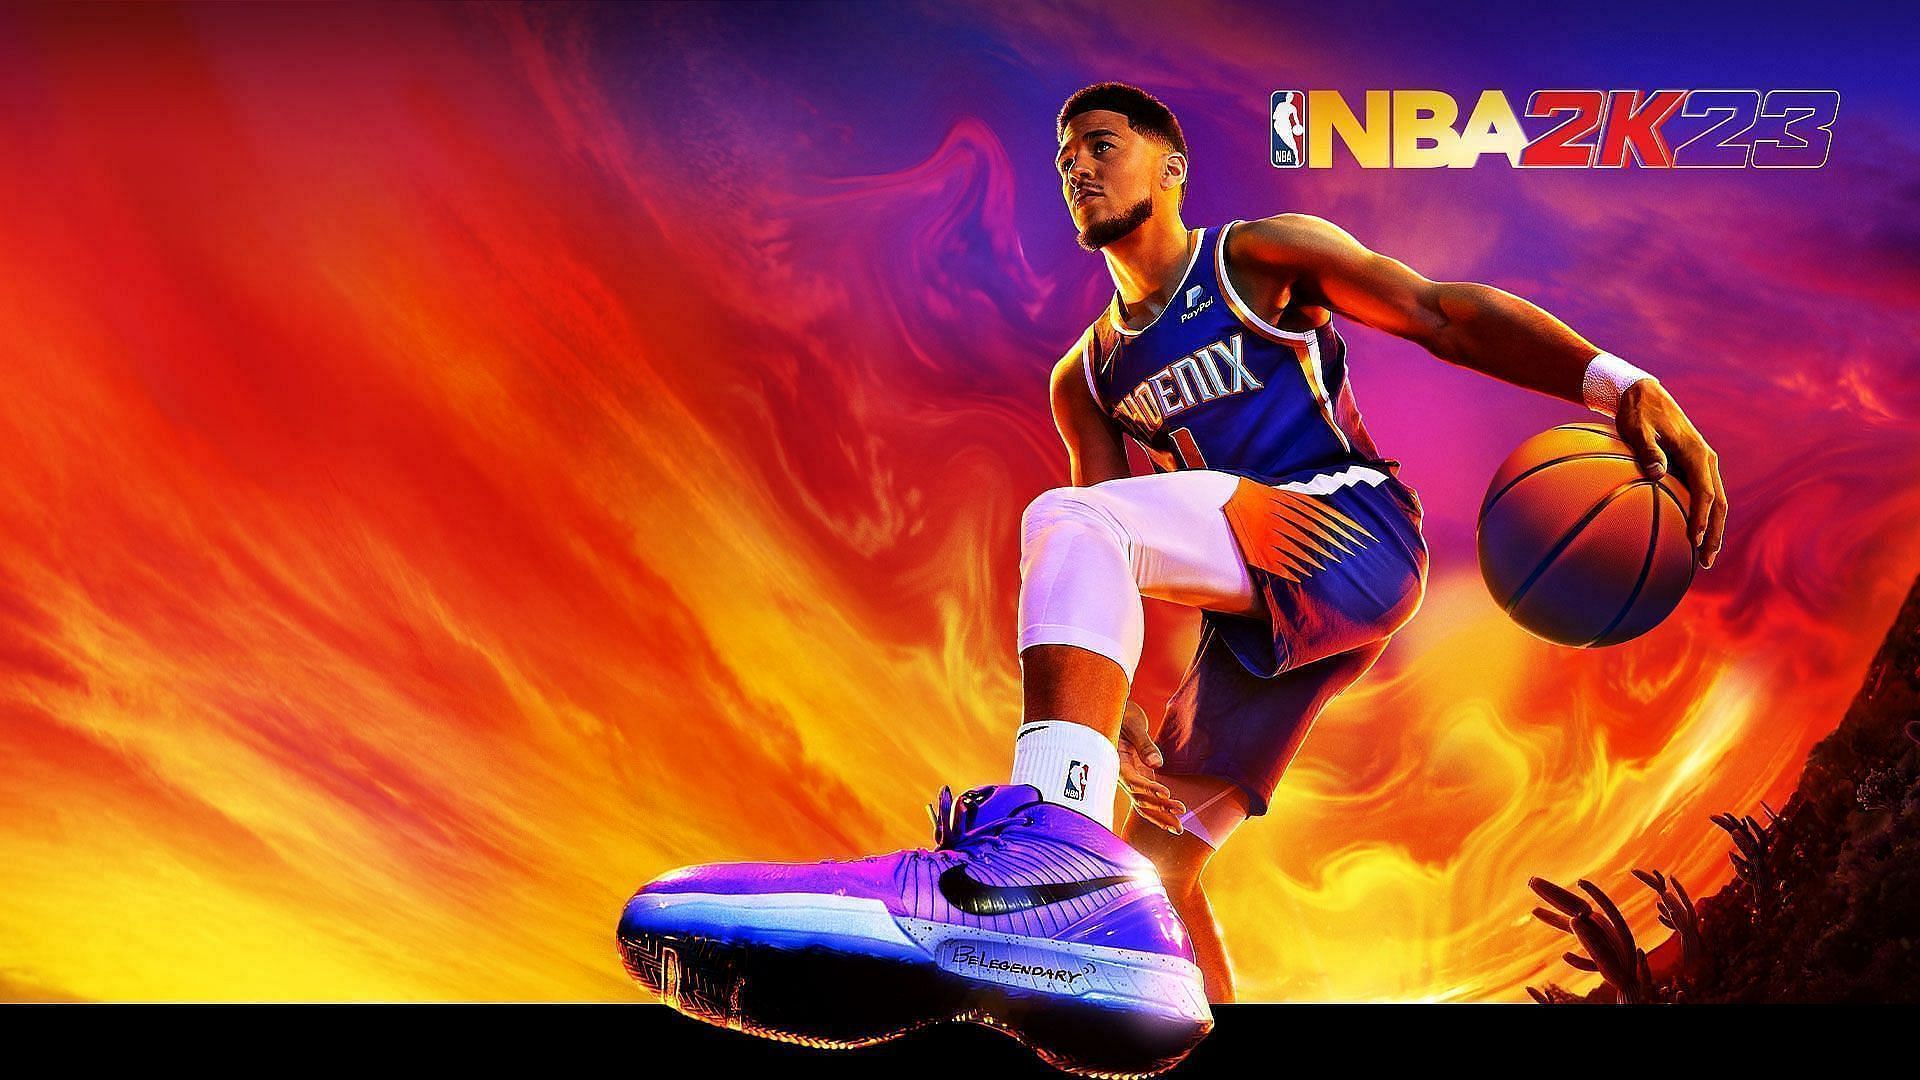 NBA 2K23 has a new pack release.